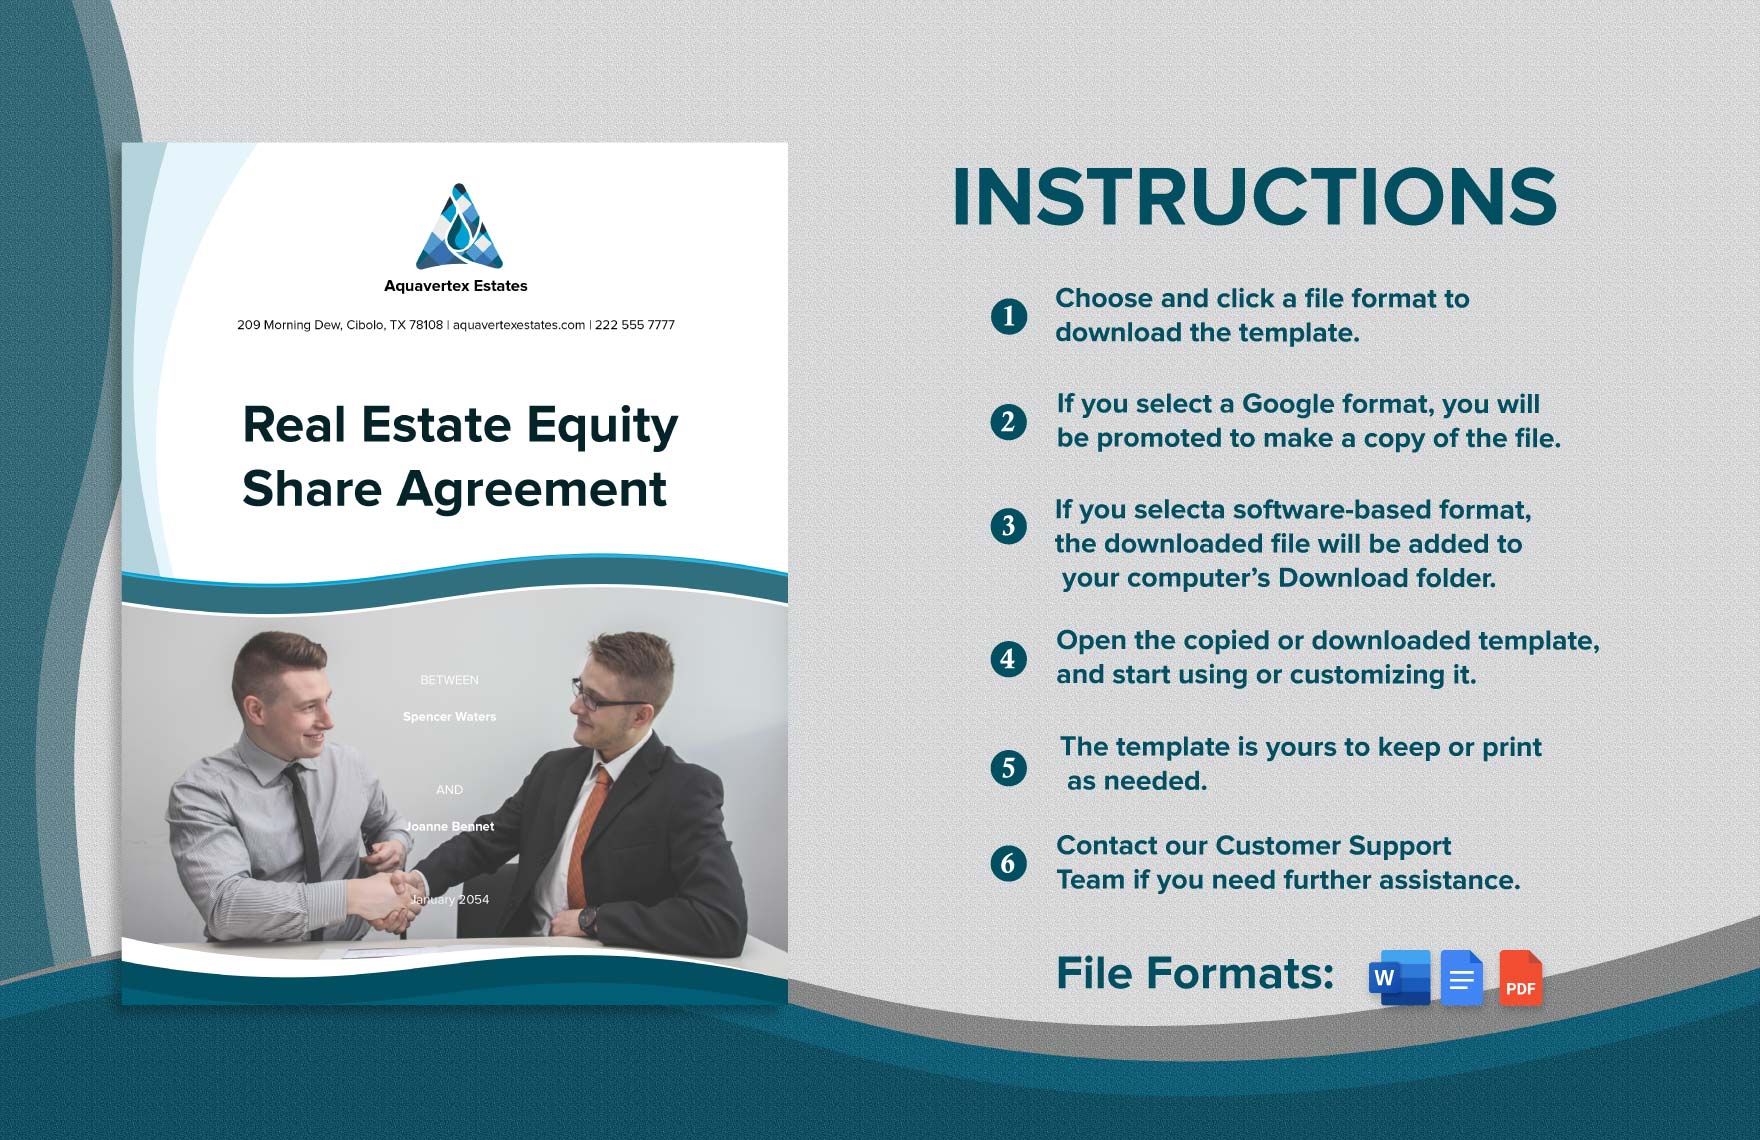  Real Estate Equity Share Agreement Example